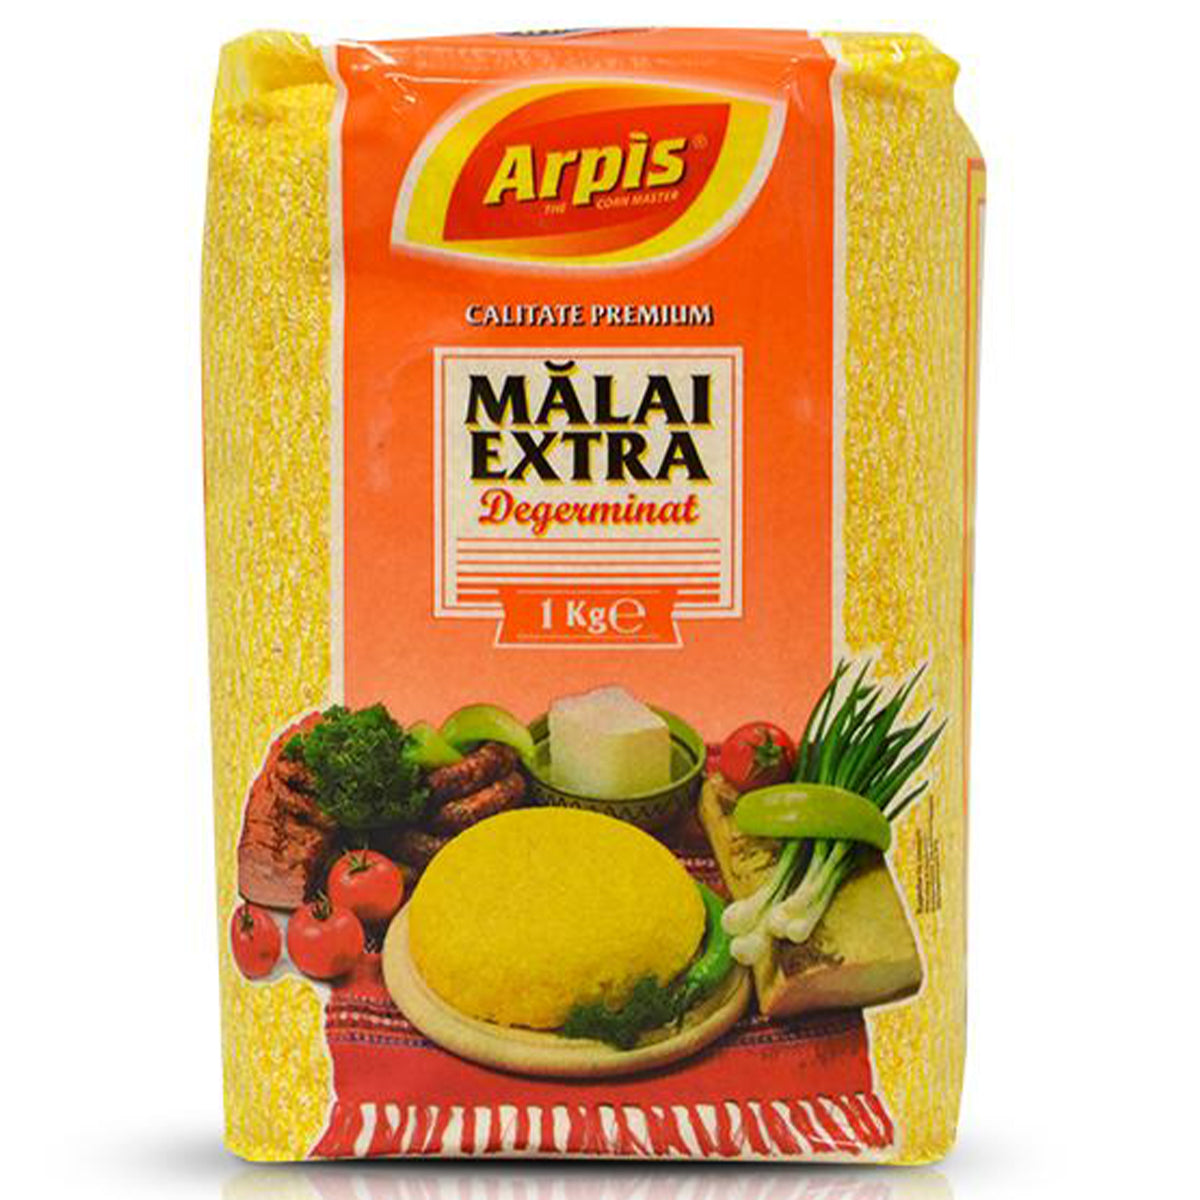 A bag of Arpis - Corn Flour - 1kg on a white background.